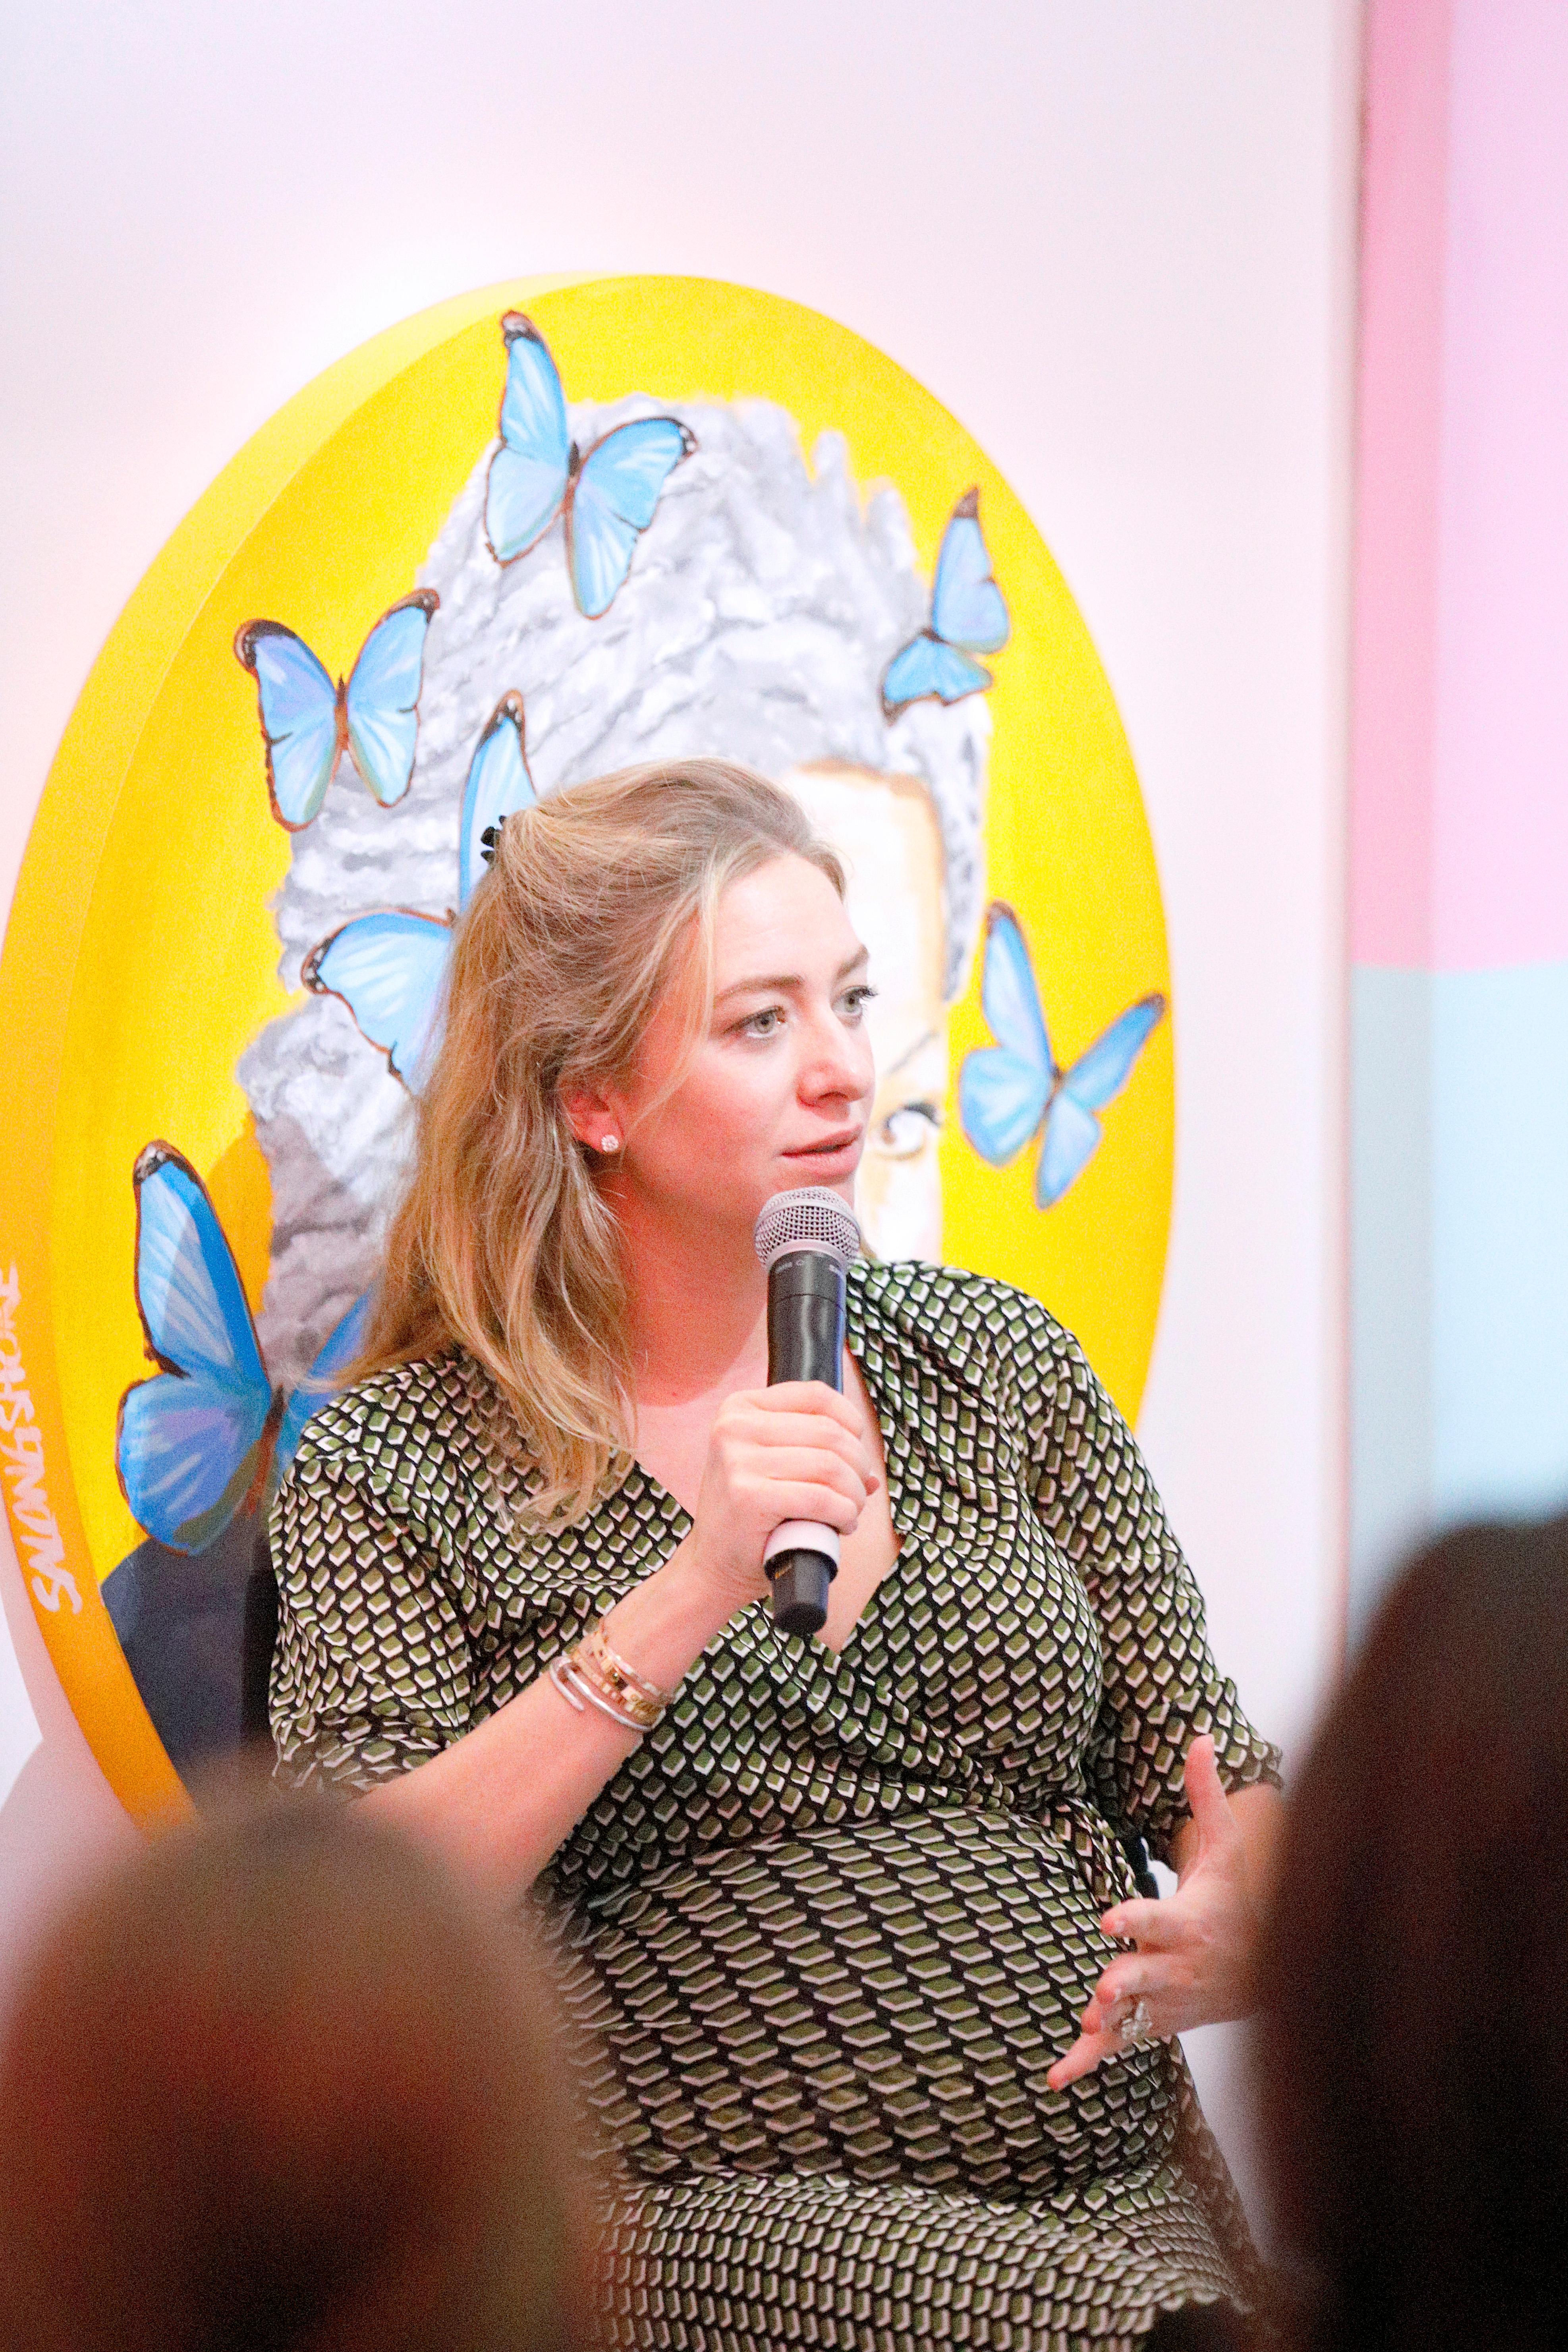 Bumble founder and CEO Whitney Wolfe Herd